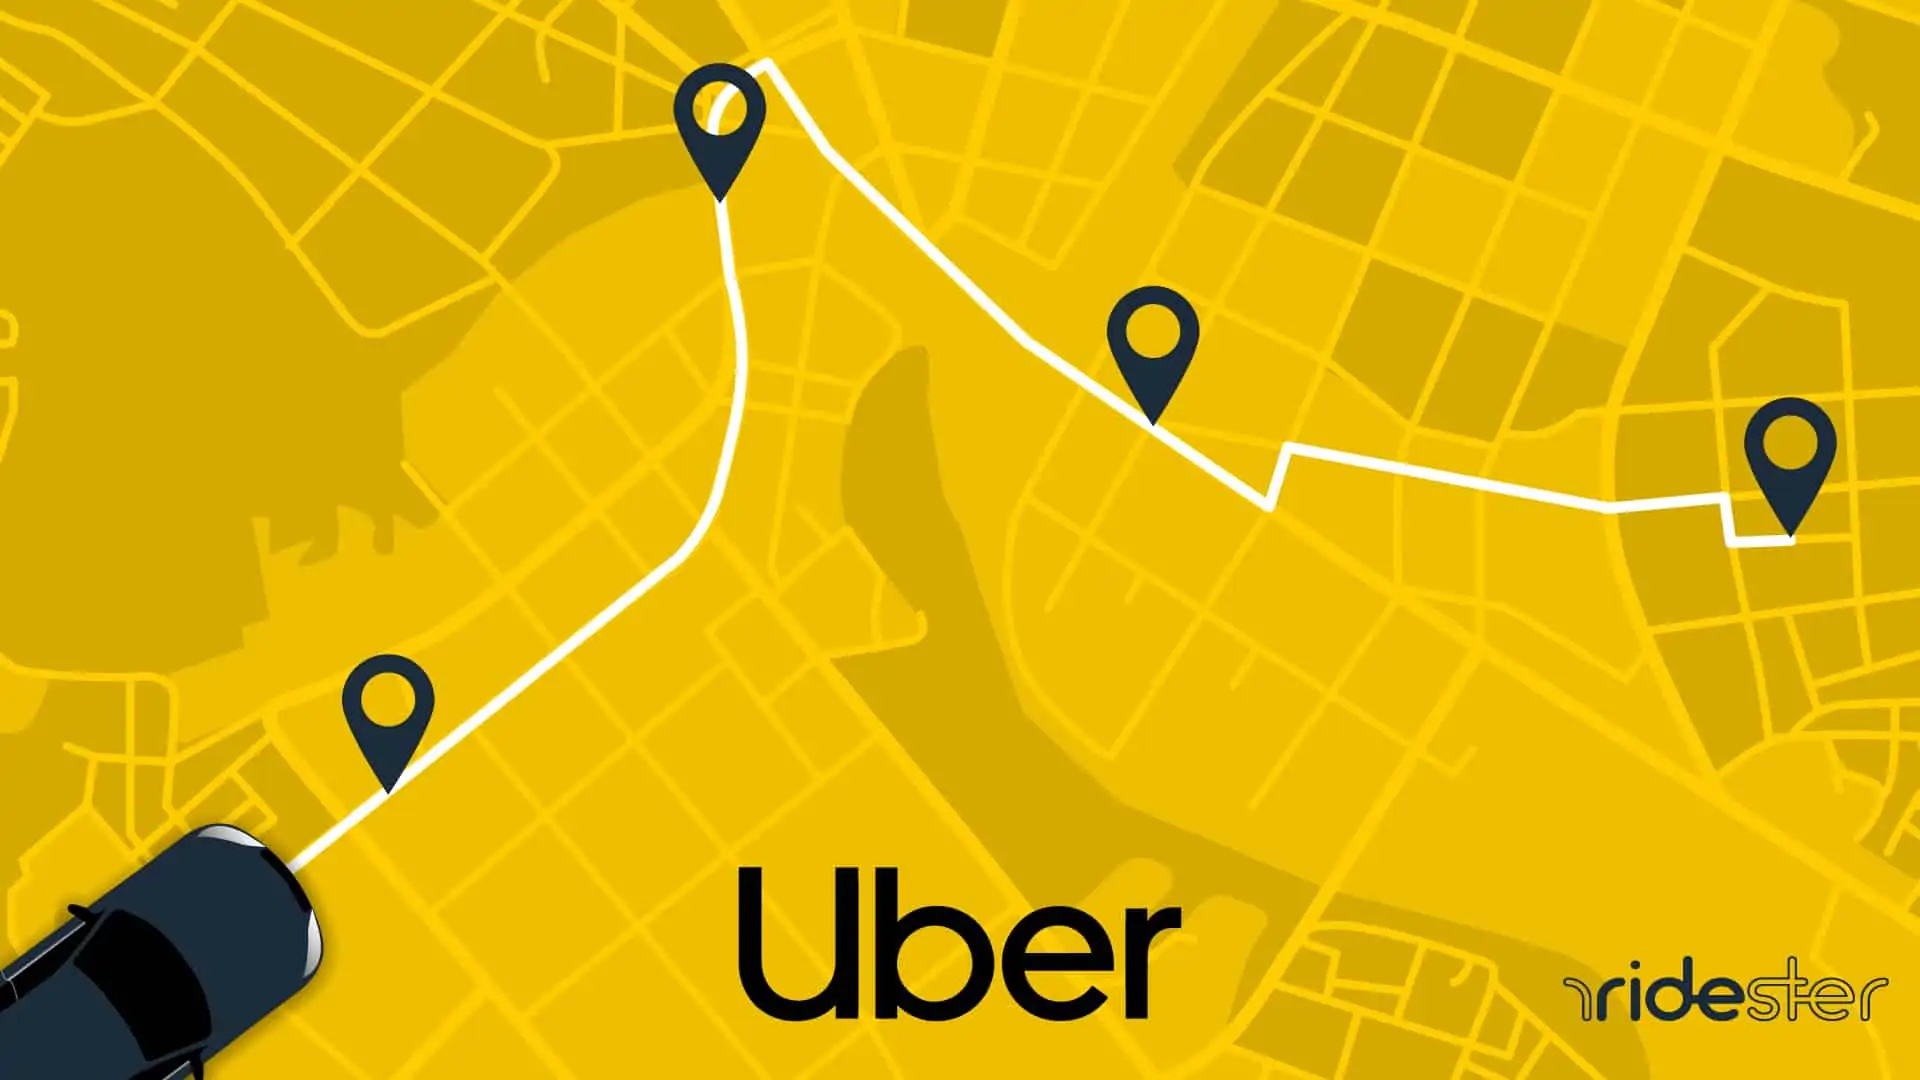 vector graphic showing an illustration of Uber multiple stops on an illustration